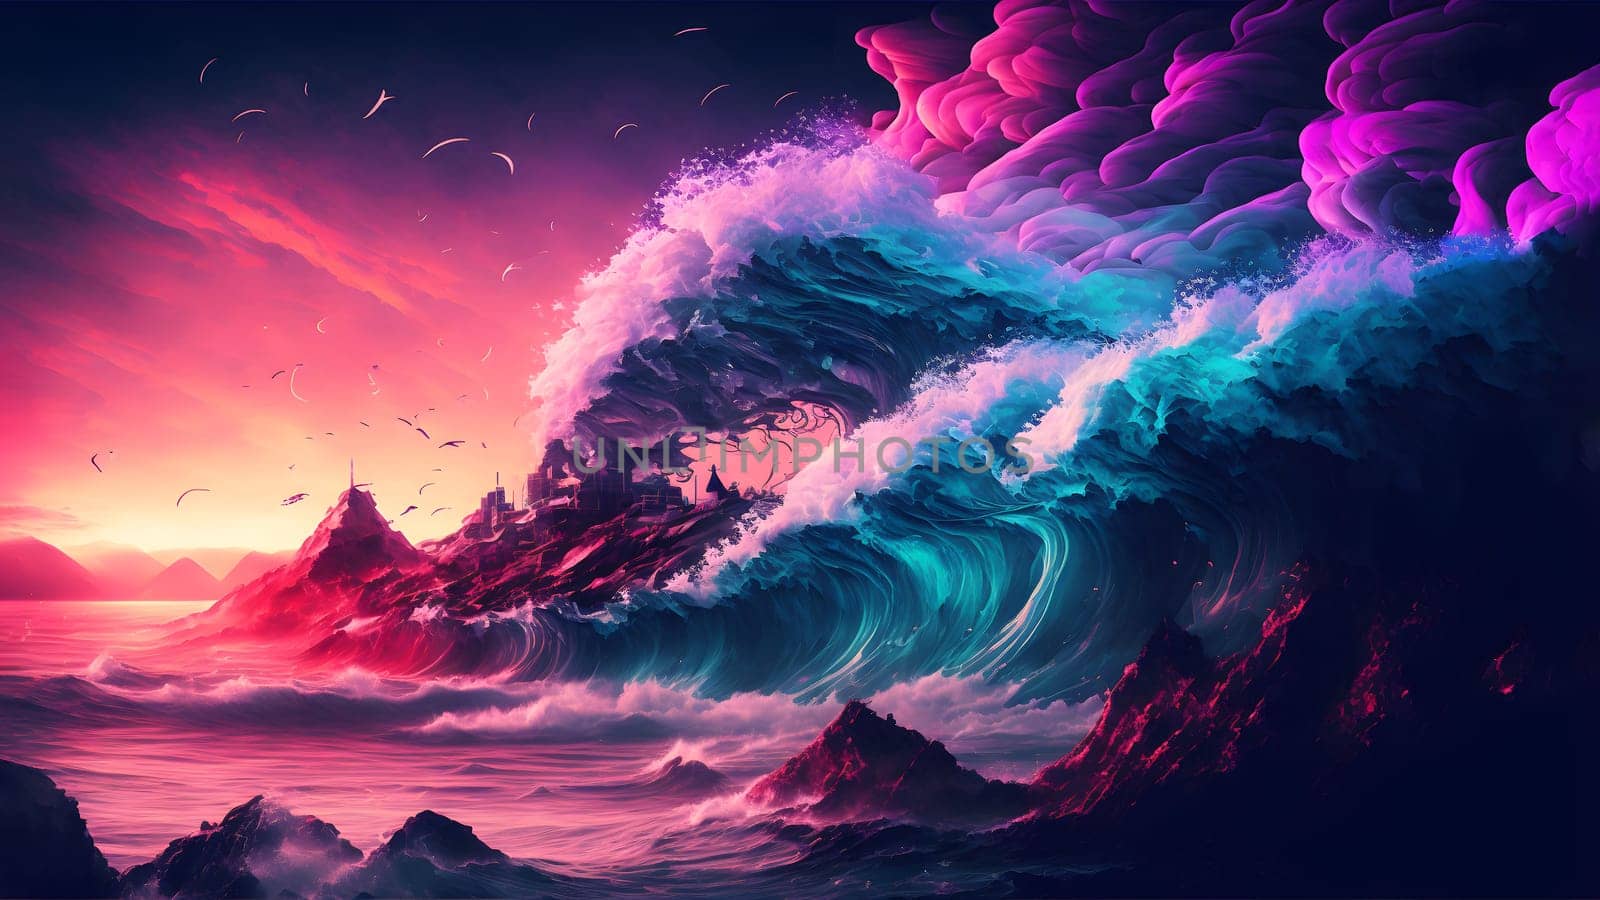 ocean wave at purple sunset in retro style, neural network generated art by z1b